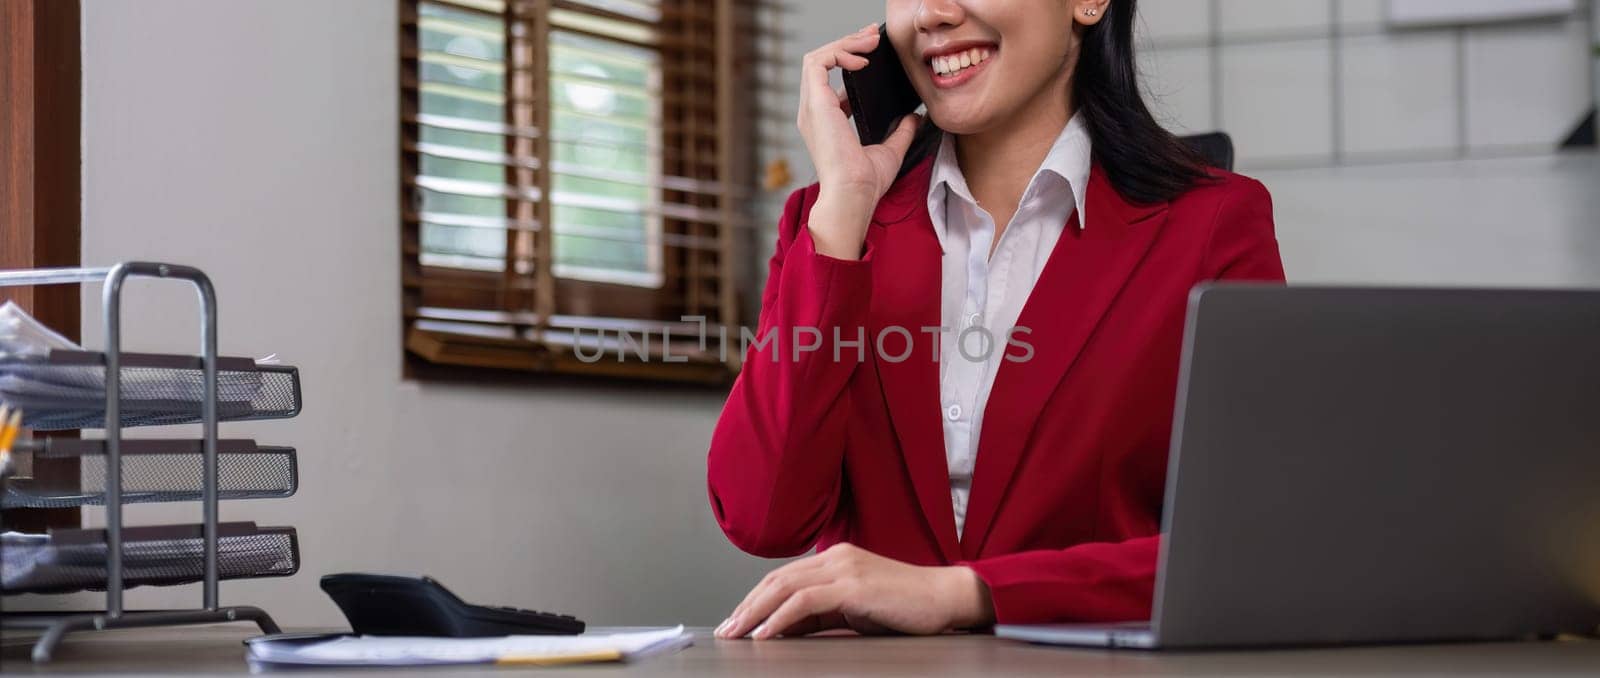 Happy business woman sitting and talking at work Job interview in front of laptop at home office.